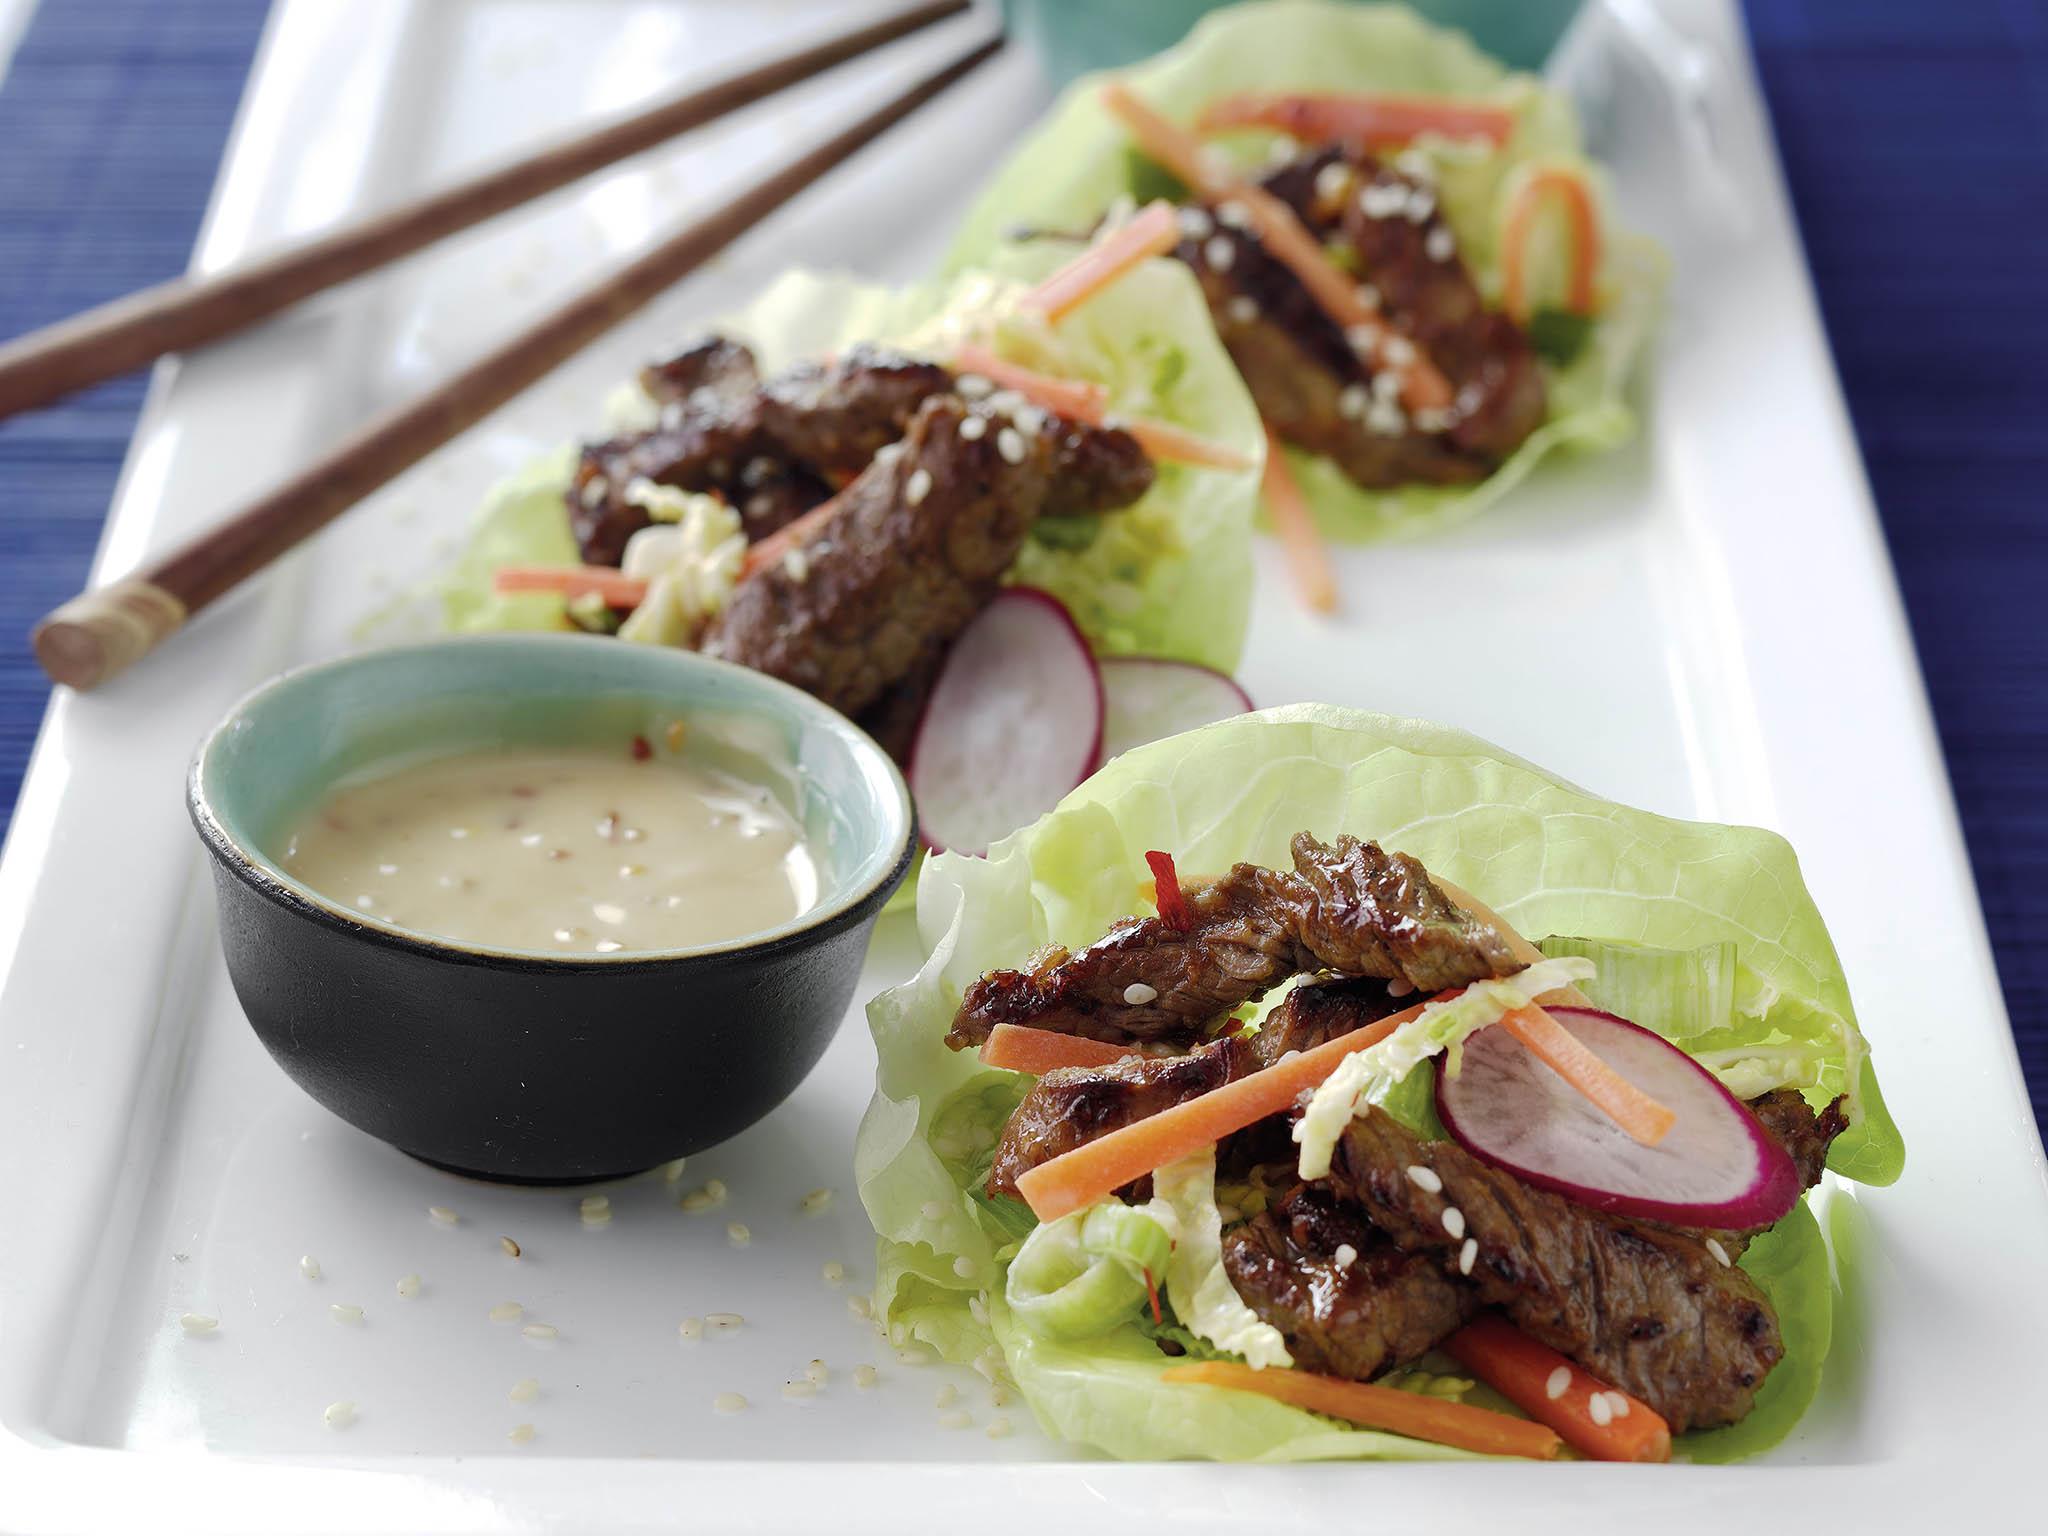 Barbecue beef wraps make for the perfect lunch time snack